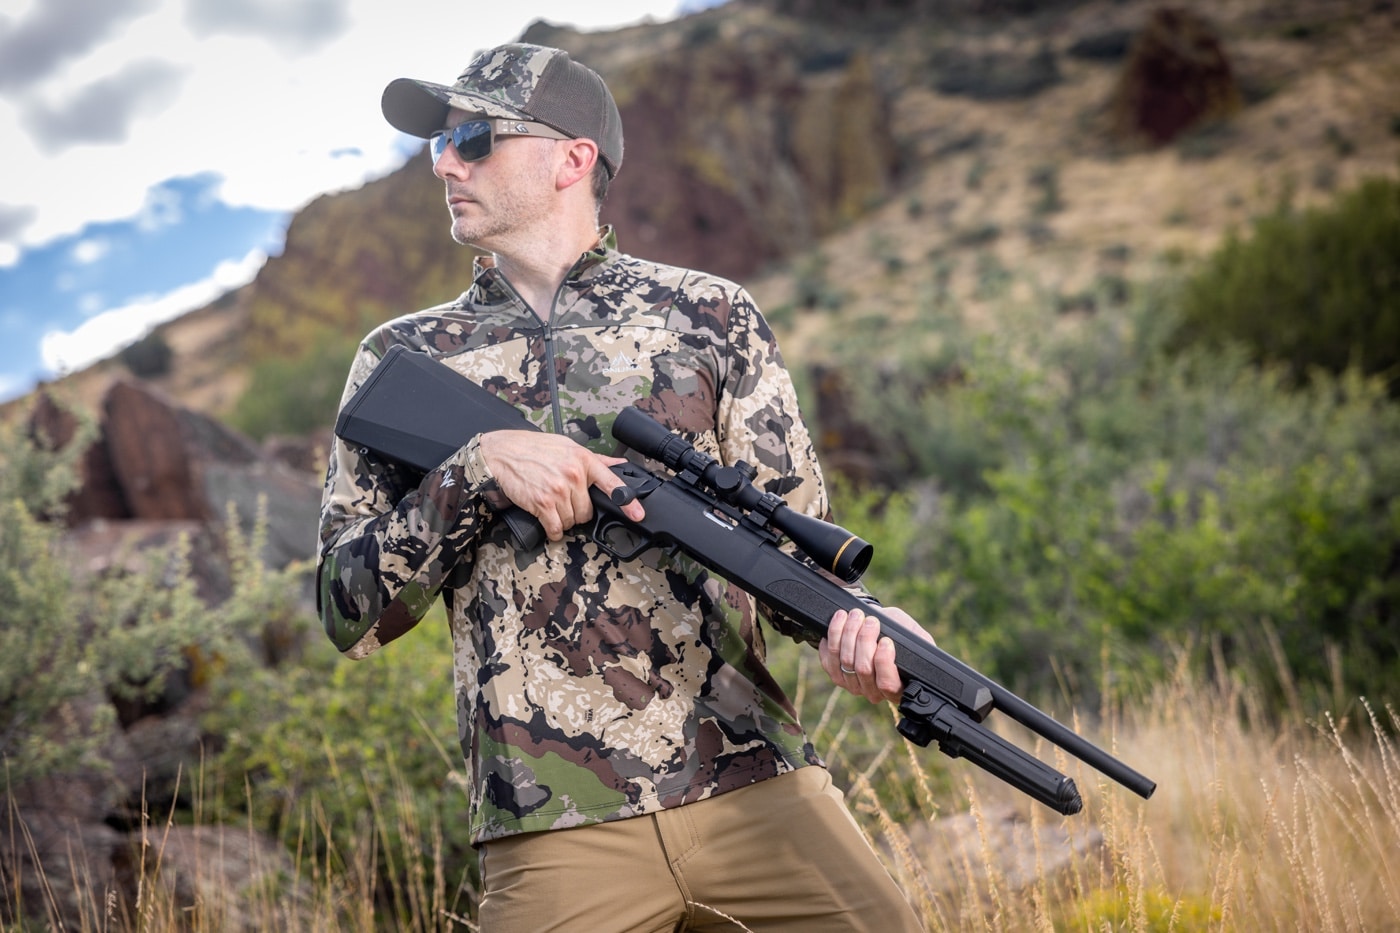 carrying the model 2020 rimfire in the field